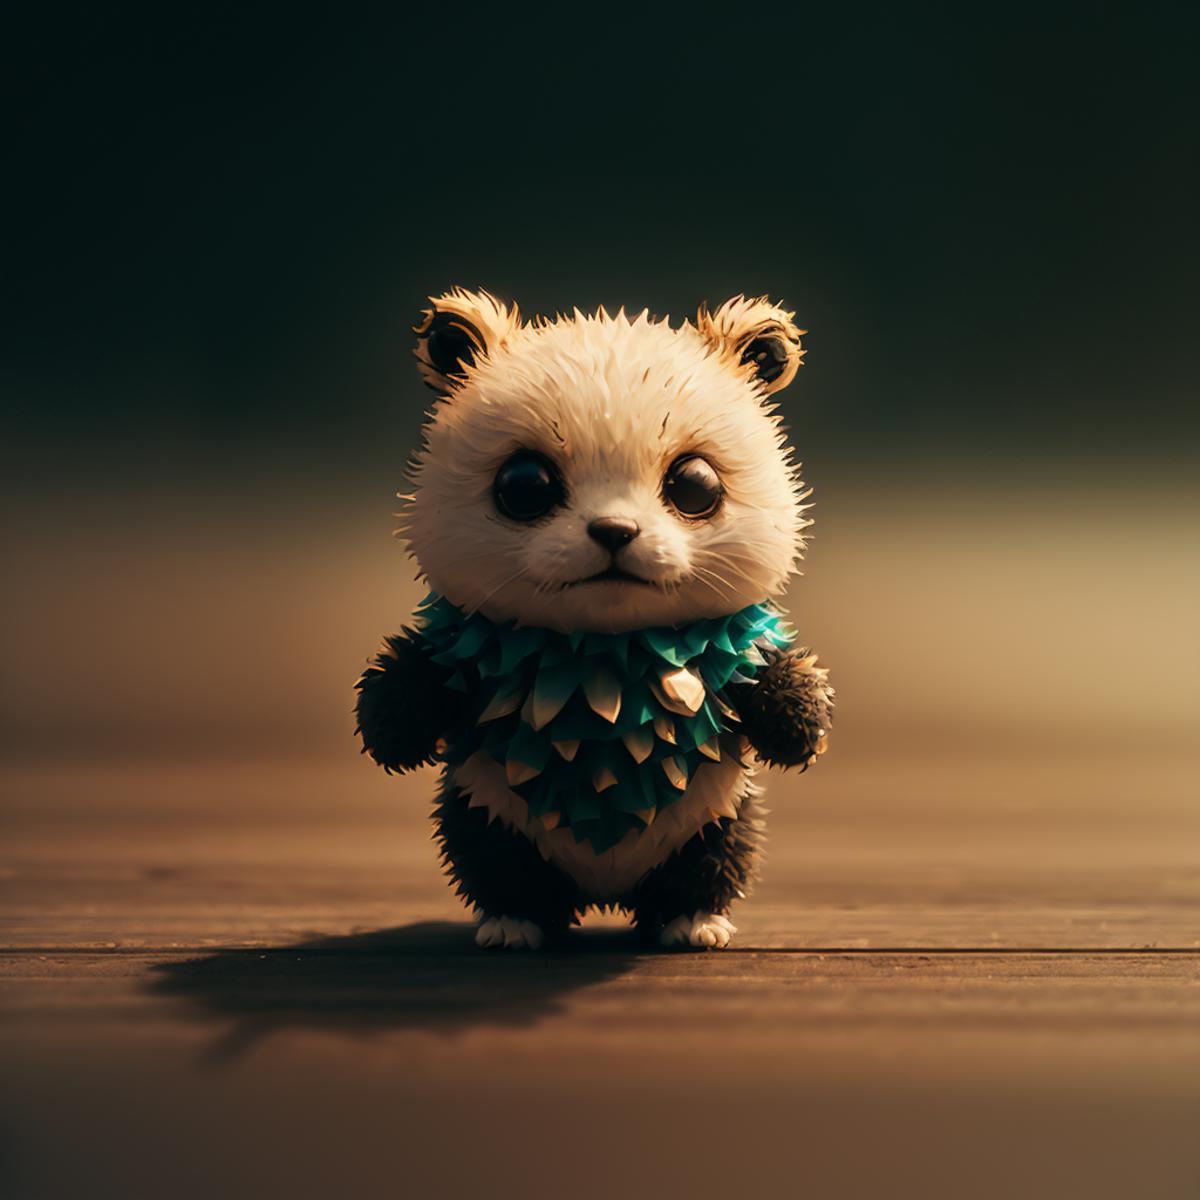 Cute Creature Style - tiny monsters, spirits and animals (cutecreature) image by cabinetroads